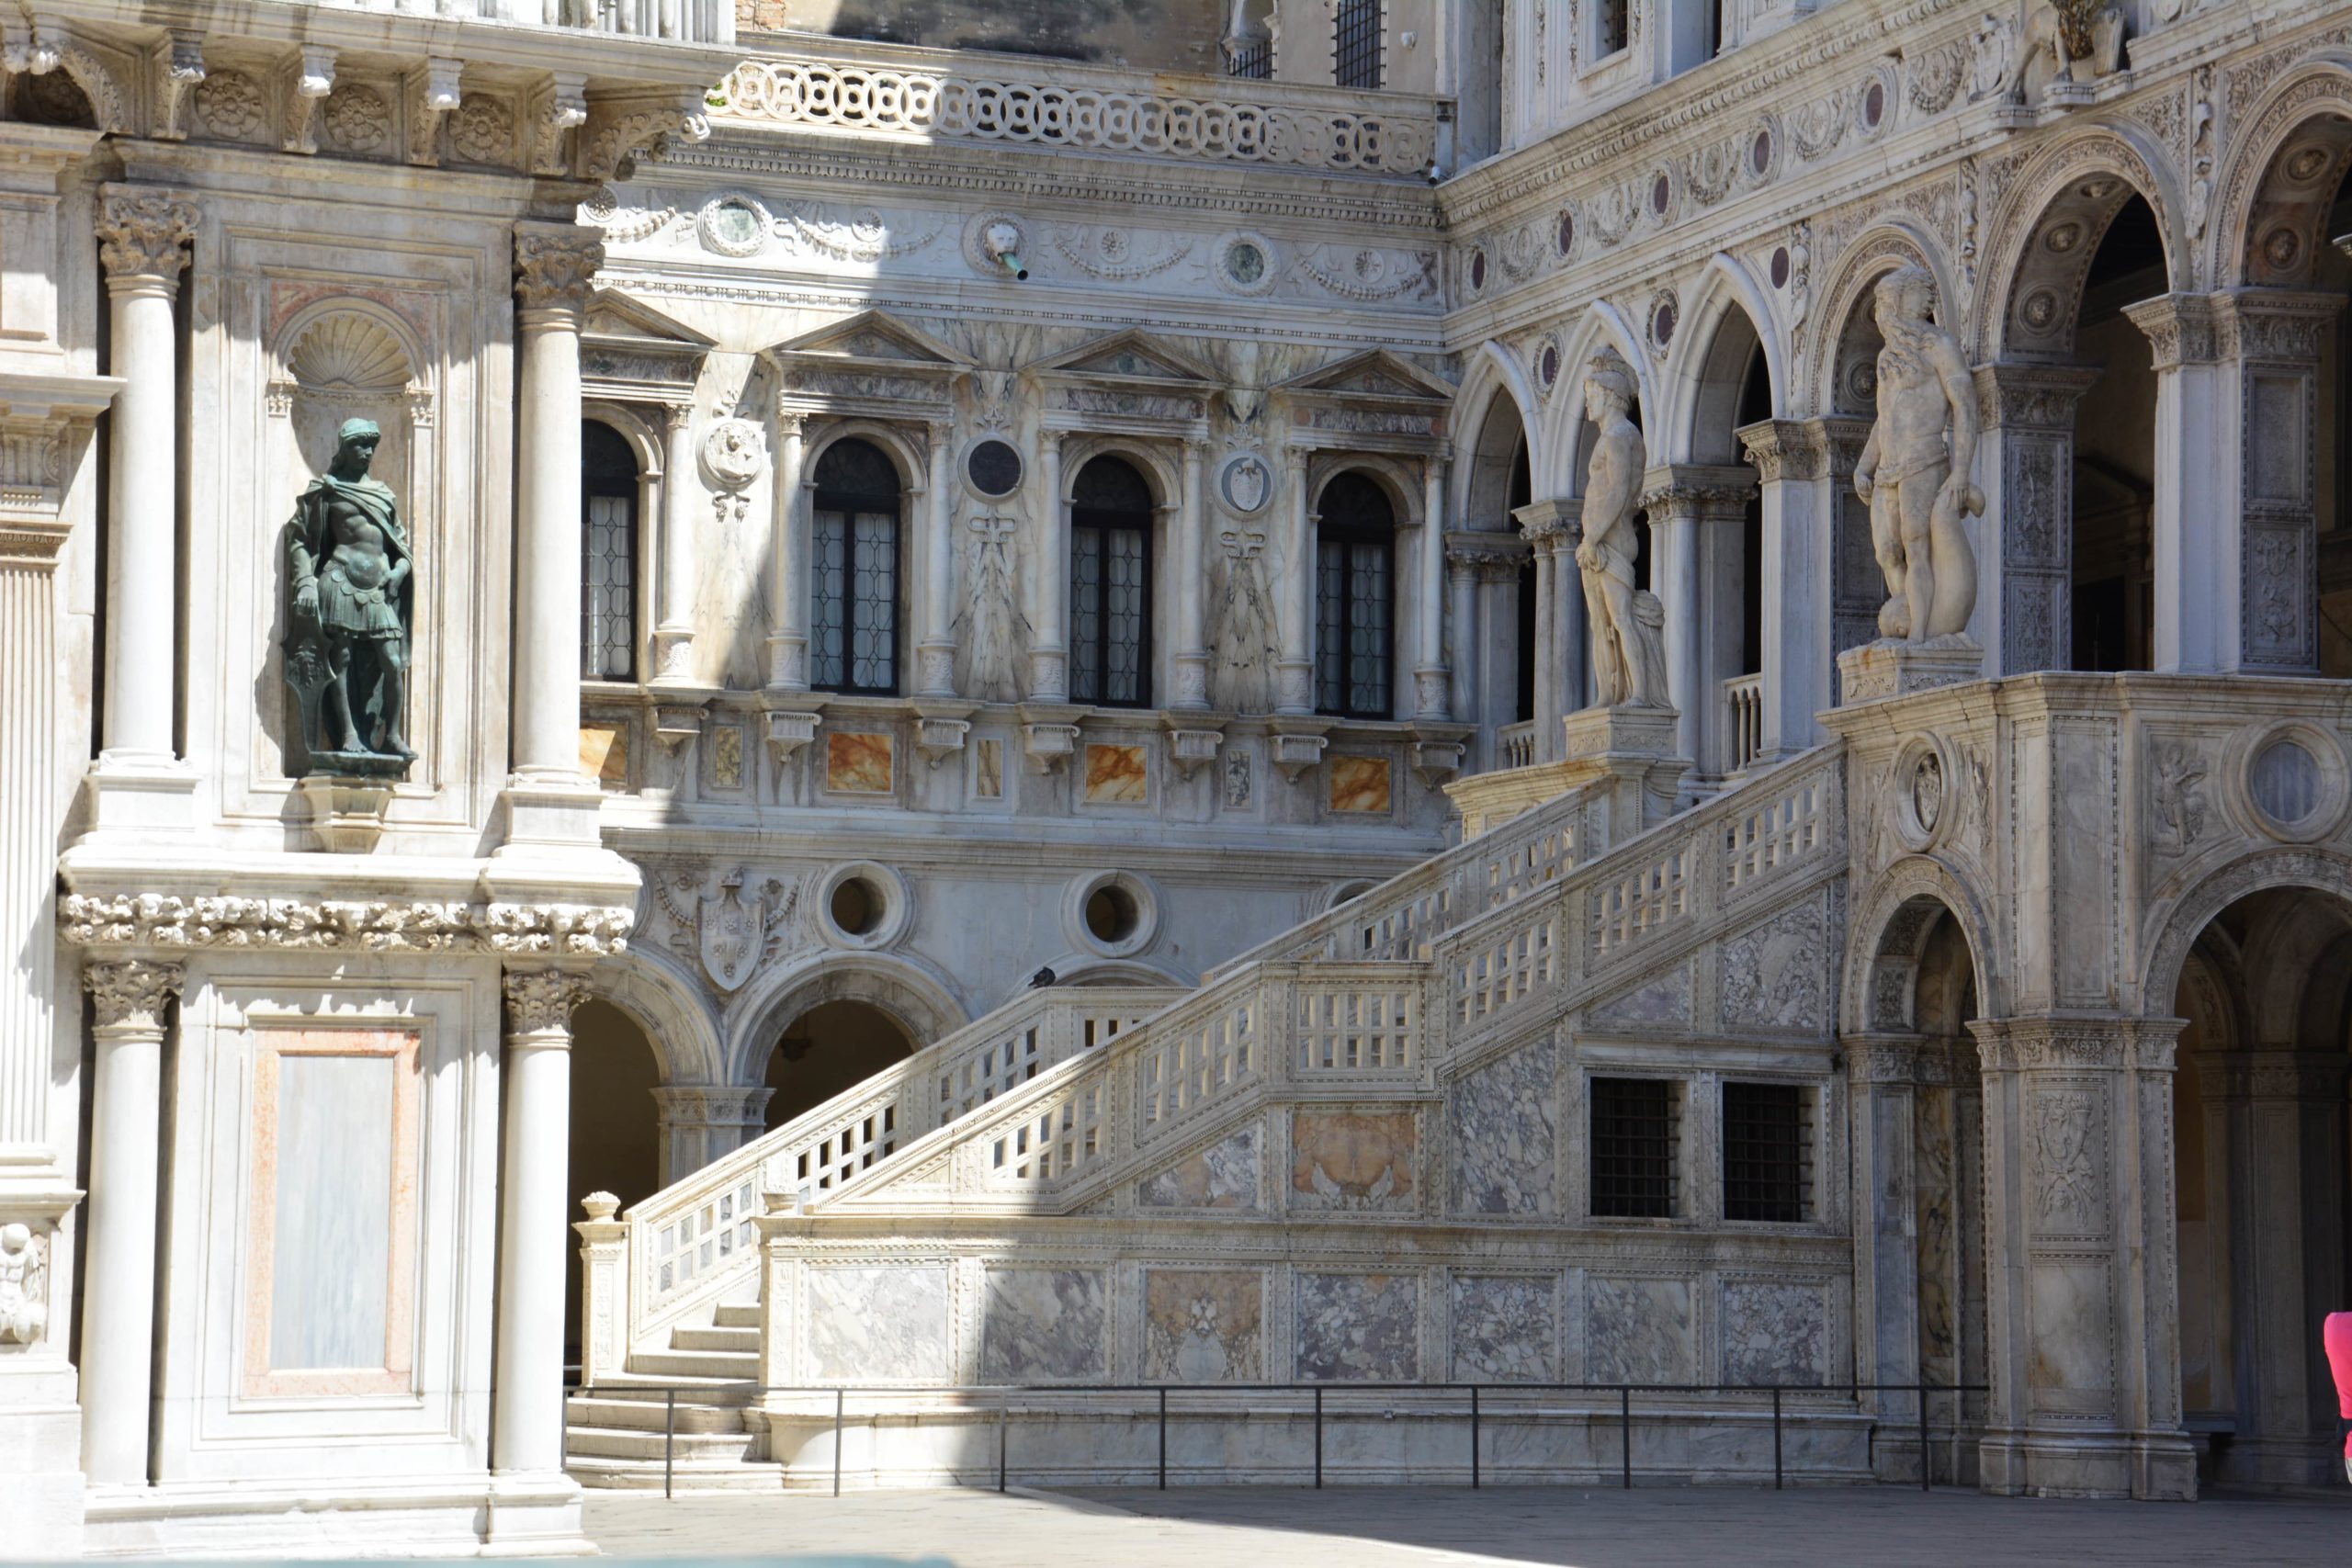 Guided tours in Venice